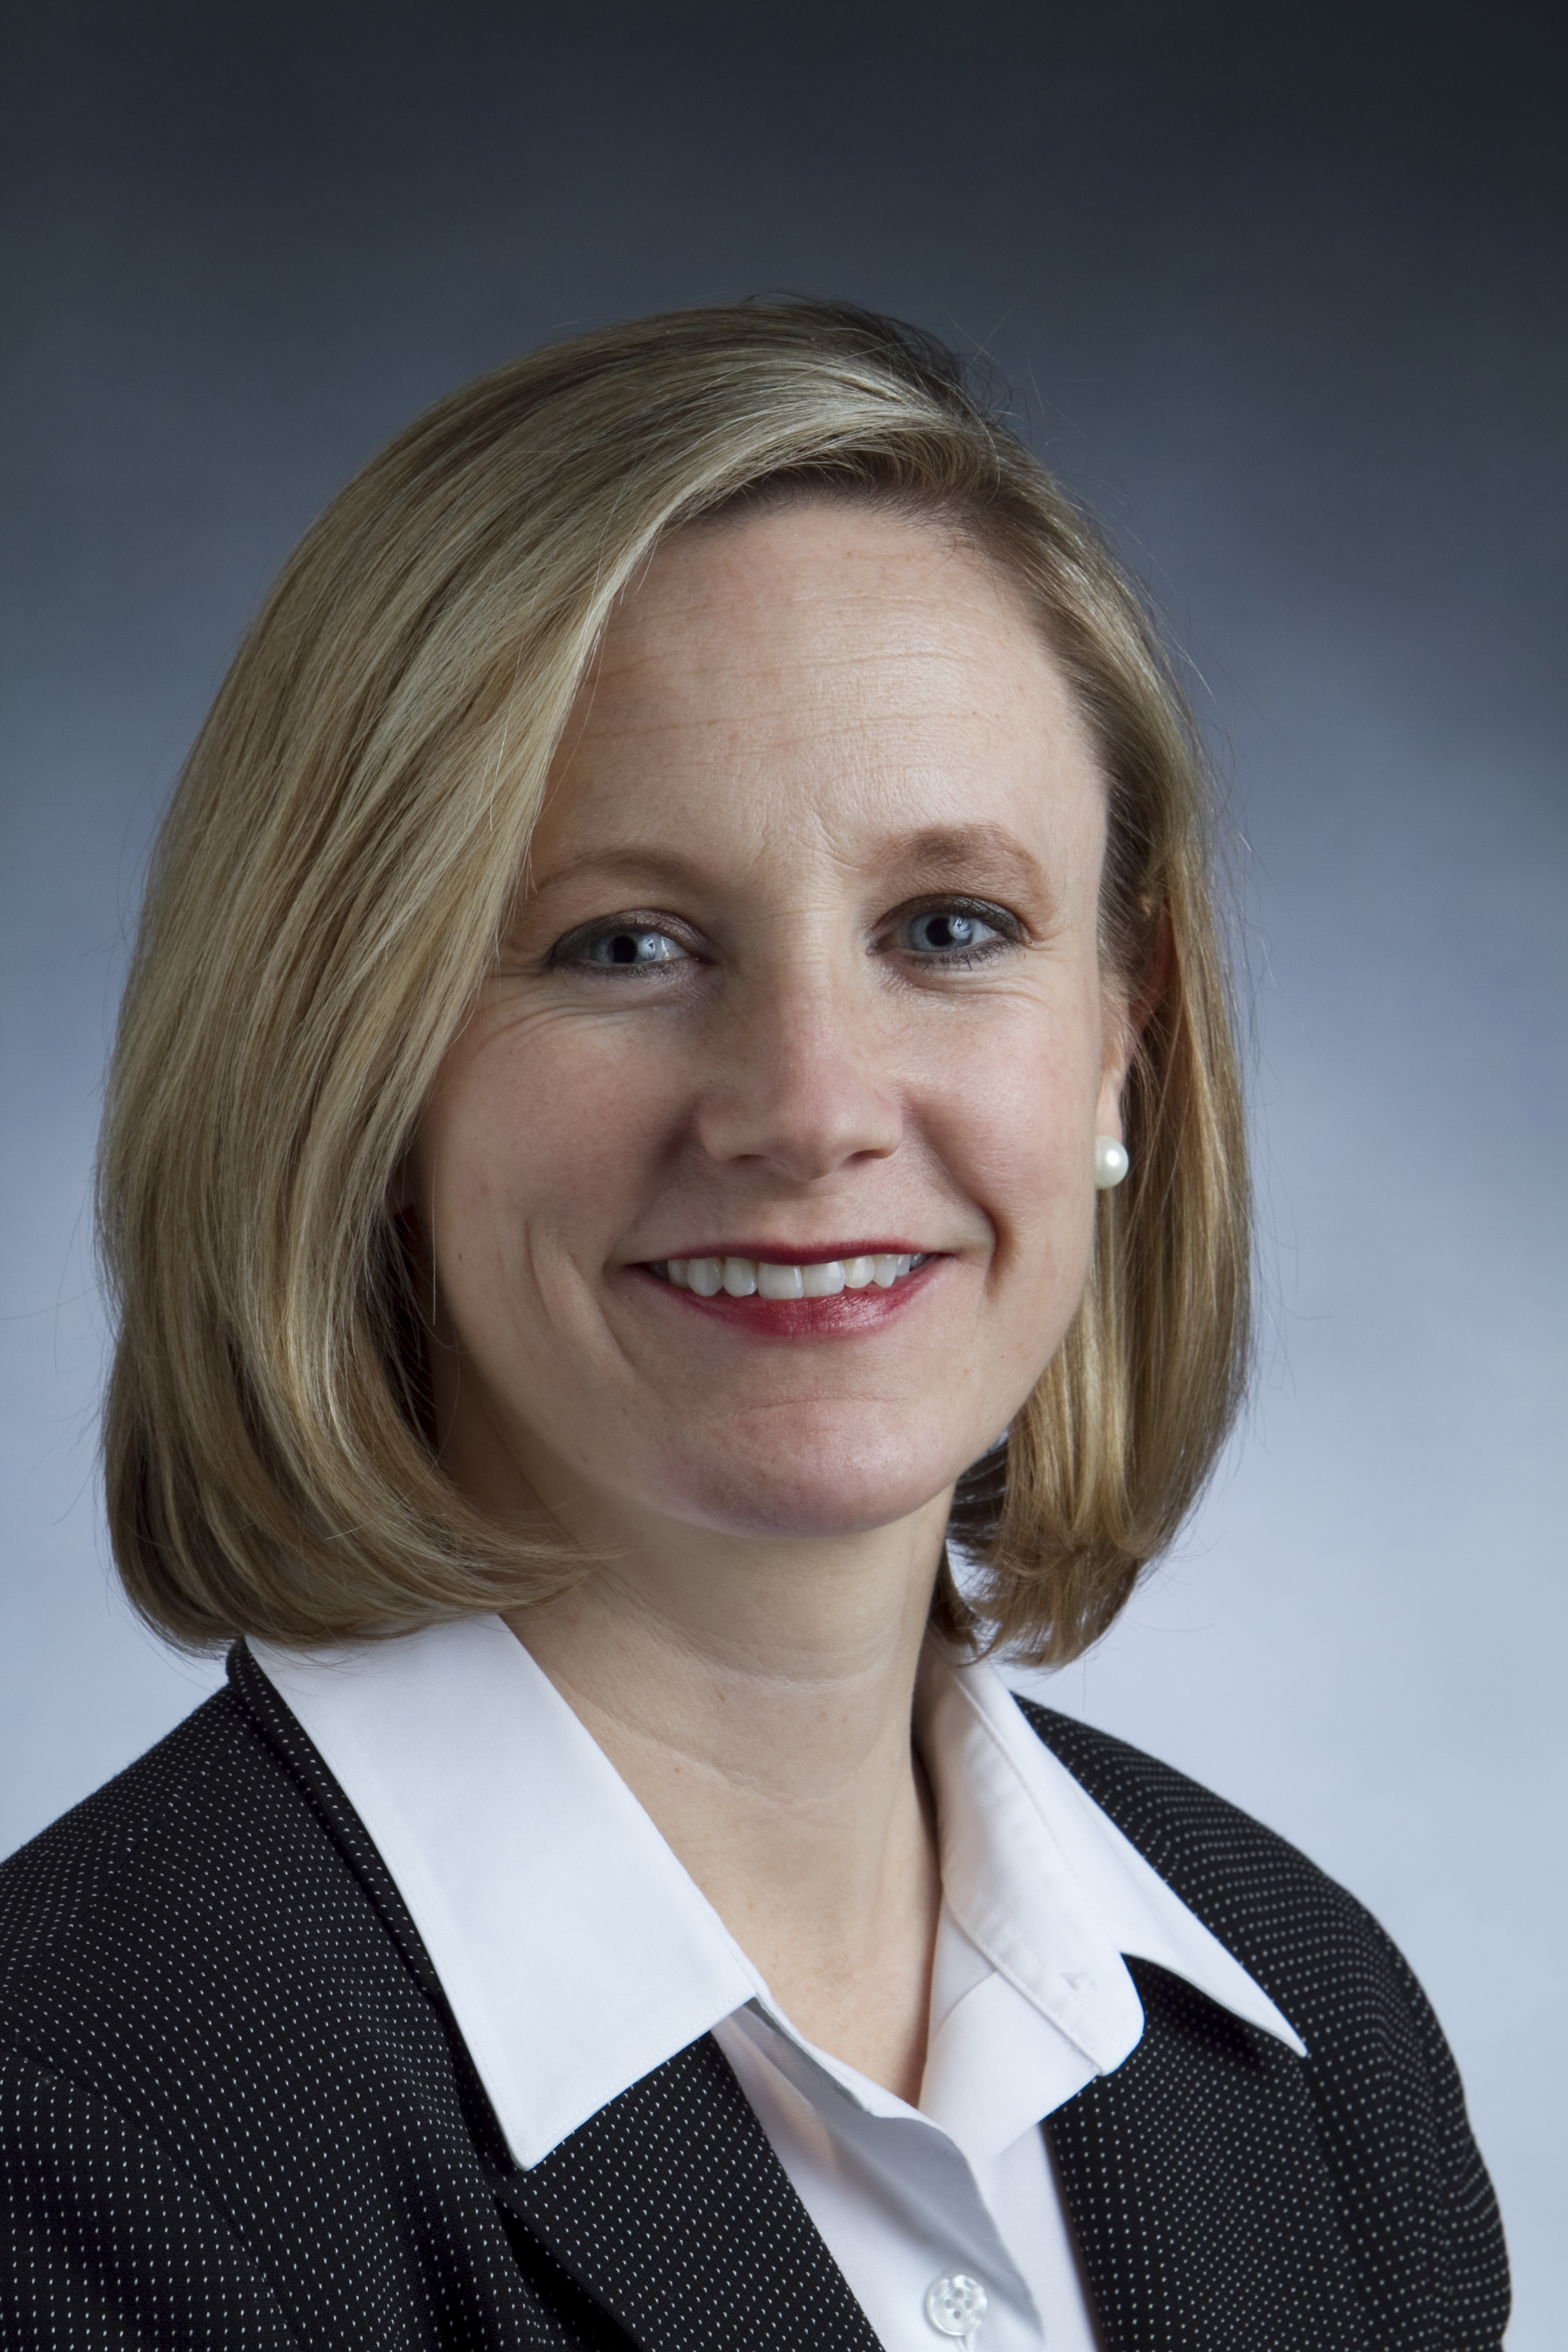 Hexcel Corporation has appointed Colleen Pritchett as president of Aerospace, Americas.